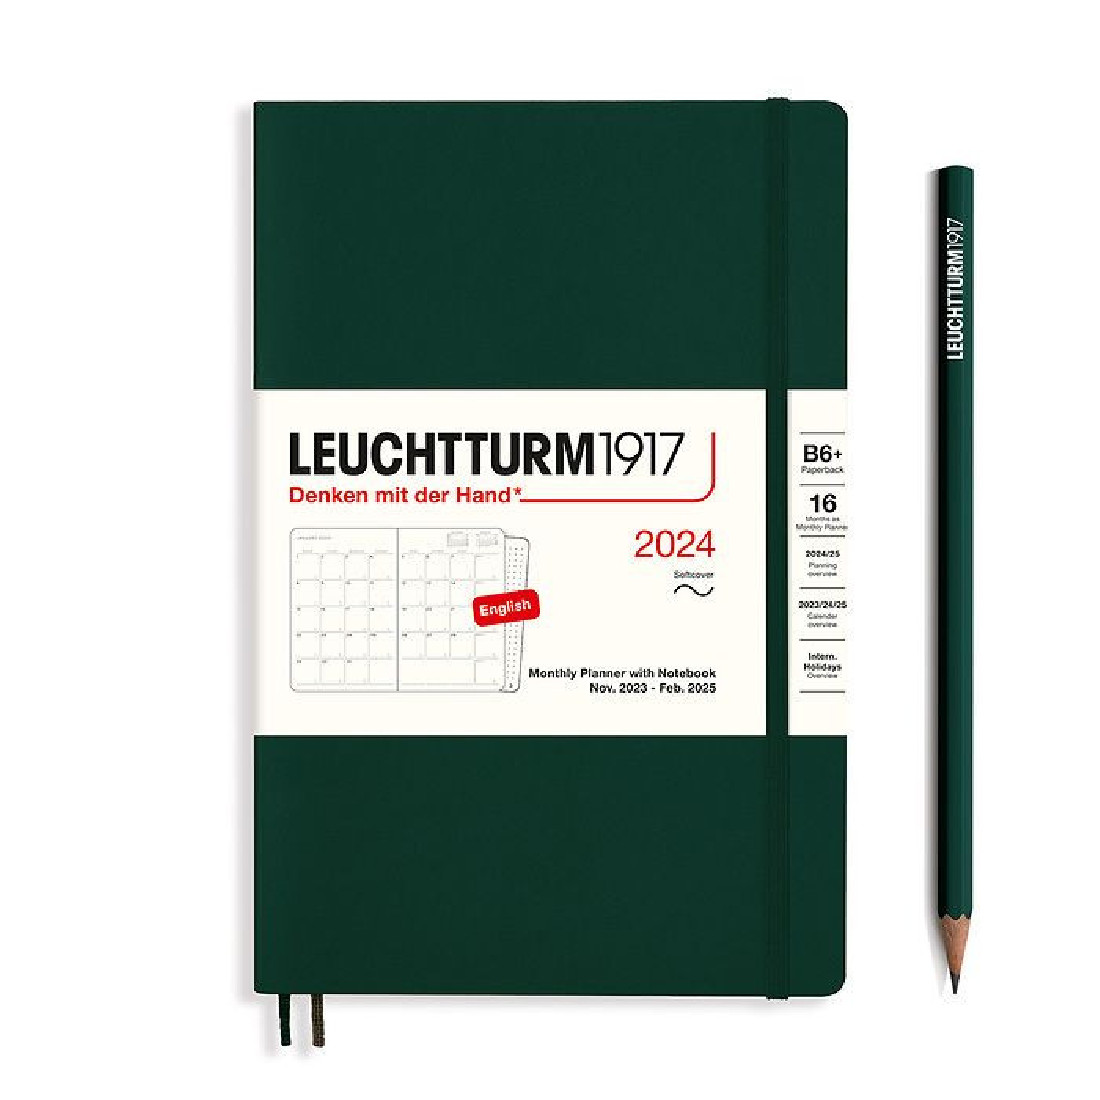 Leuchtturm 1917 Monthly Planner and Notebook 2024 Black Paperback B6 Plus Soft Cover